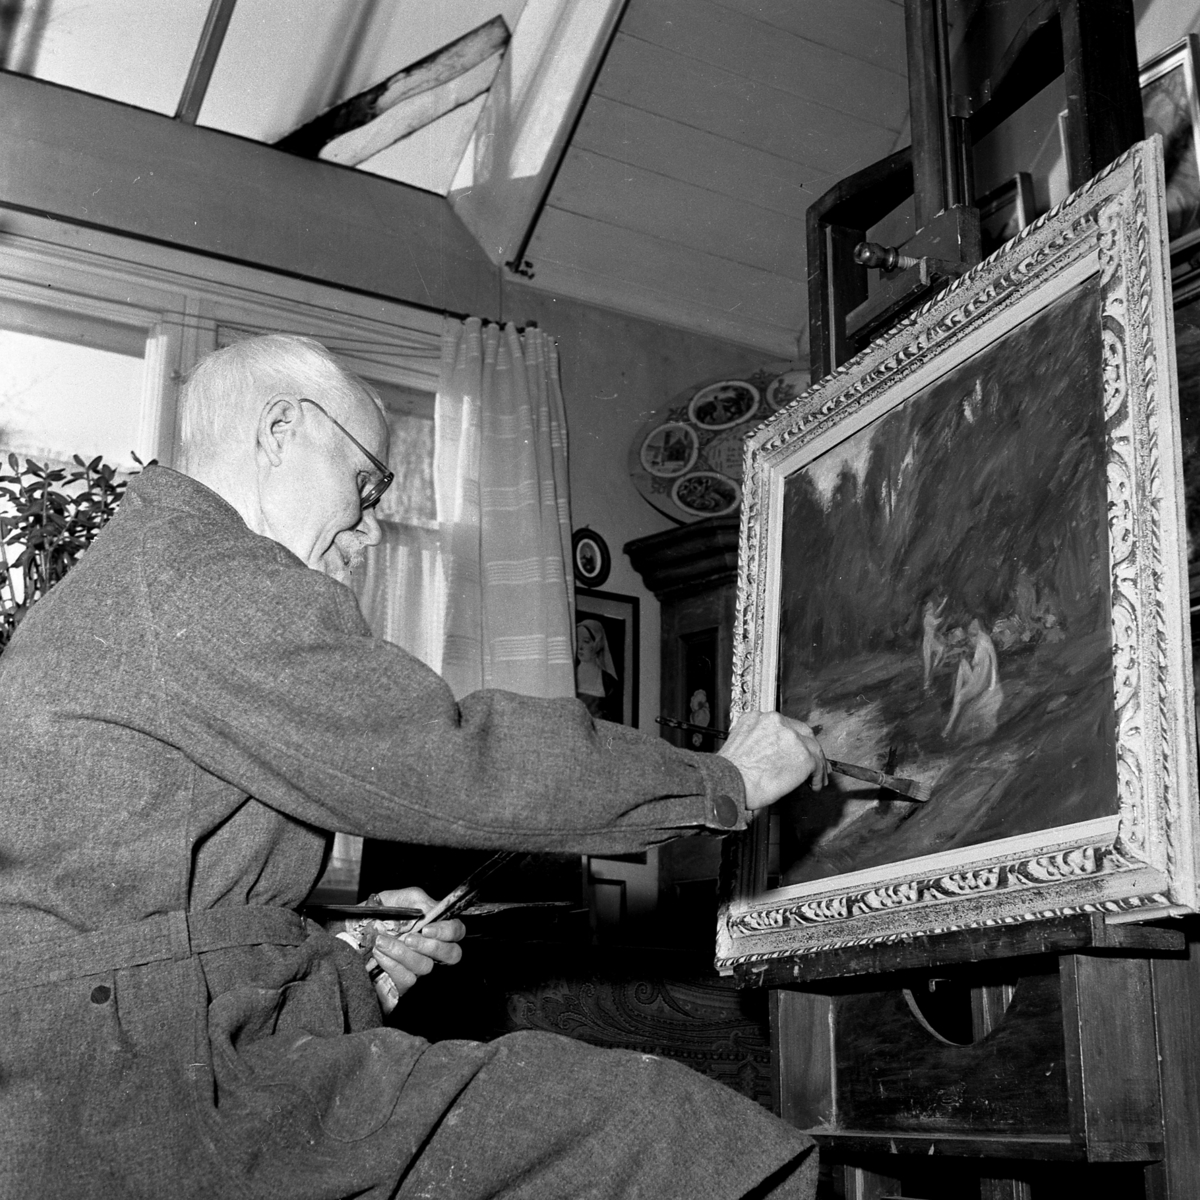 Lundeby, Alf (1870 - 1961)